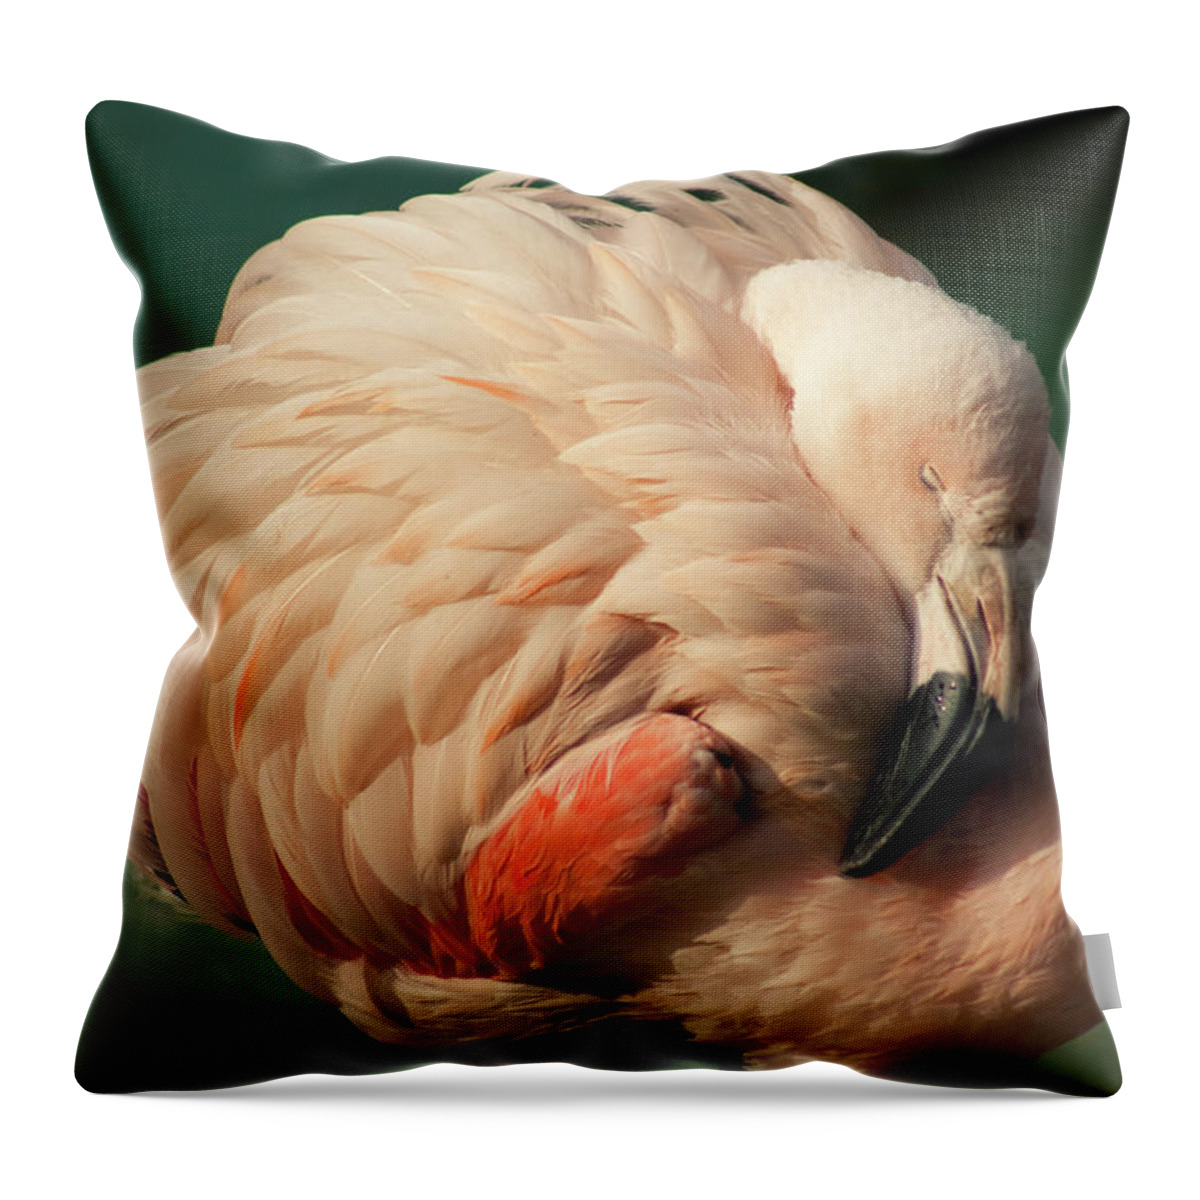 Catalonia Throw Pillow featuring the photograph Flamingo Sleeping With Sunny Day by Artur Debat